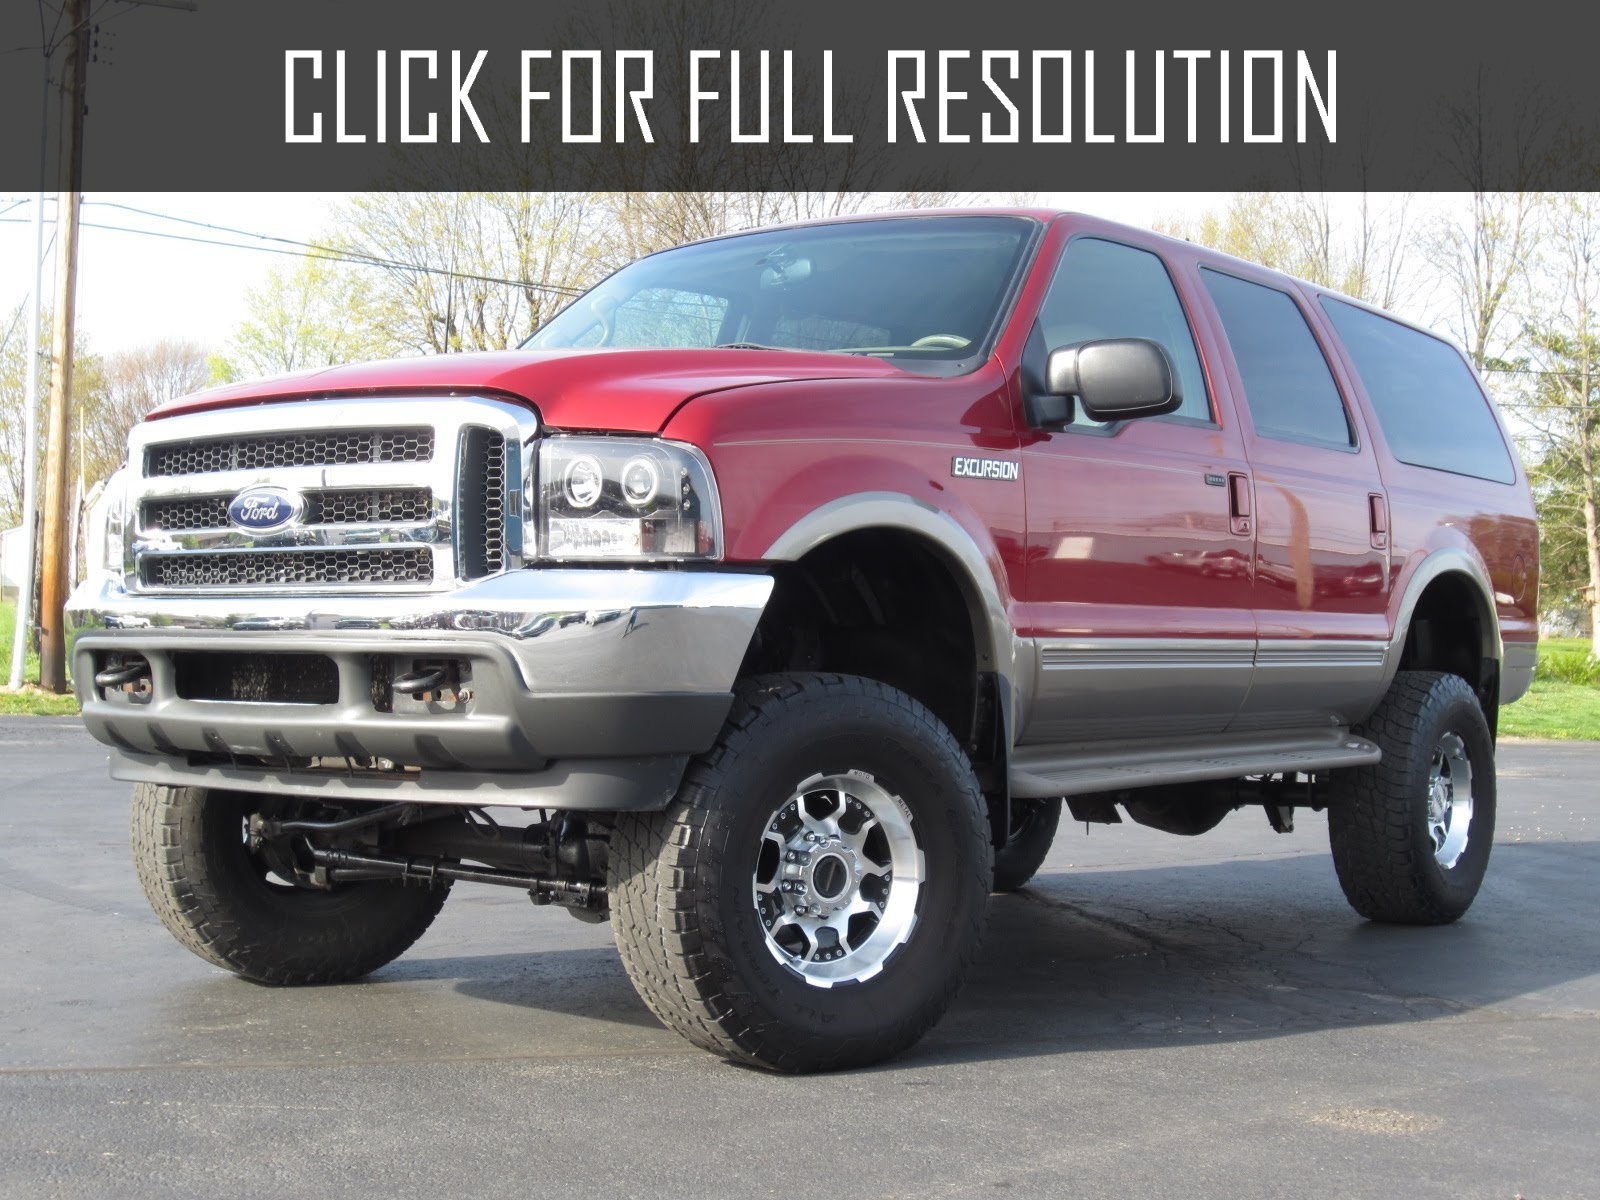 Ford Excursion 7.3 Diesel - amazing photo gallery, some information and